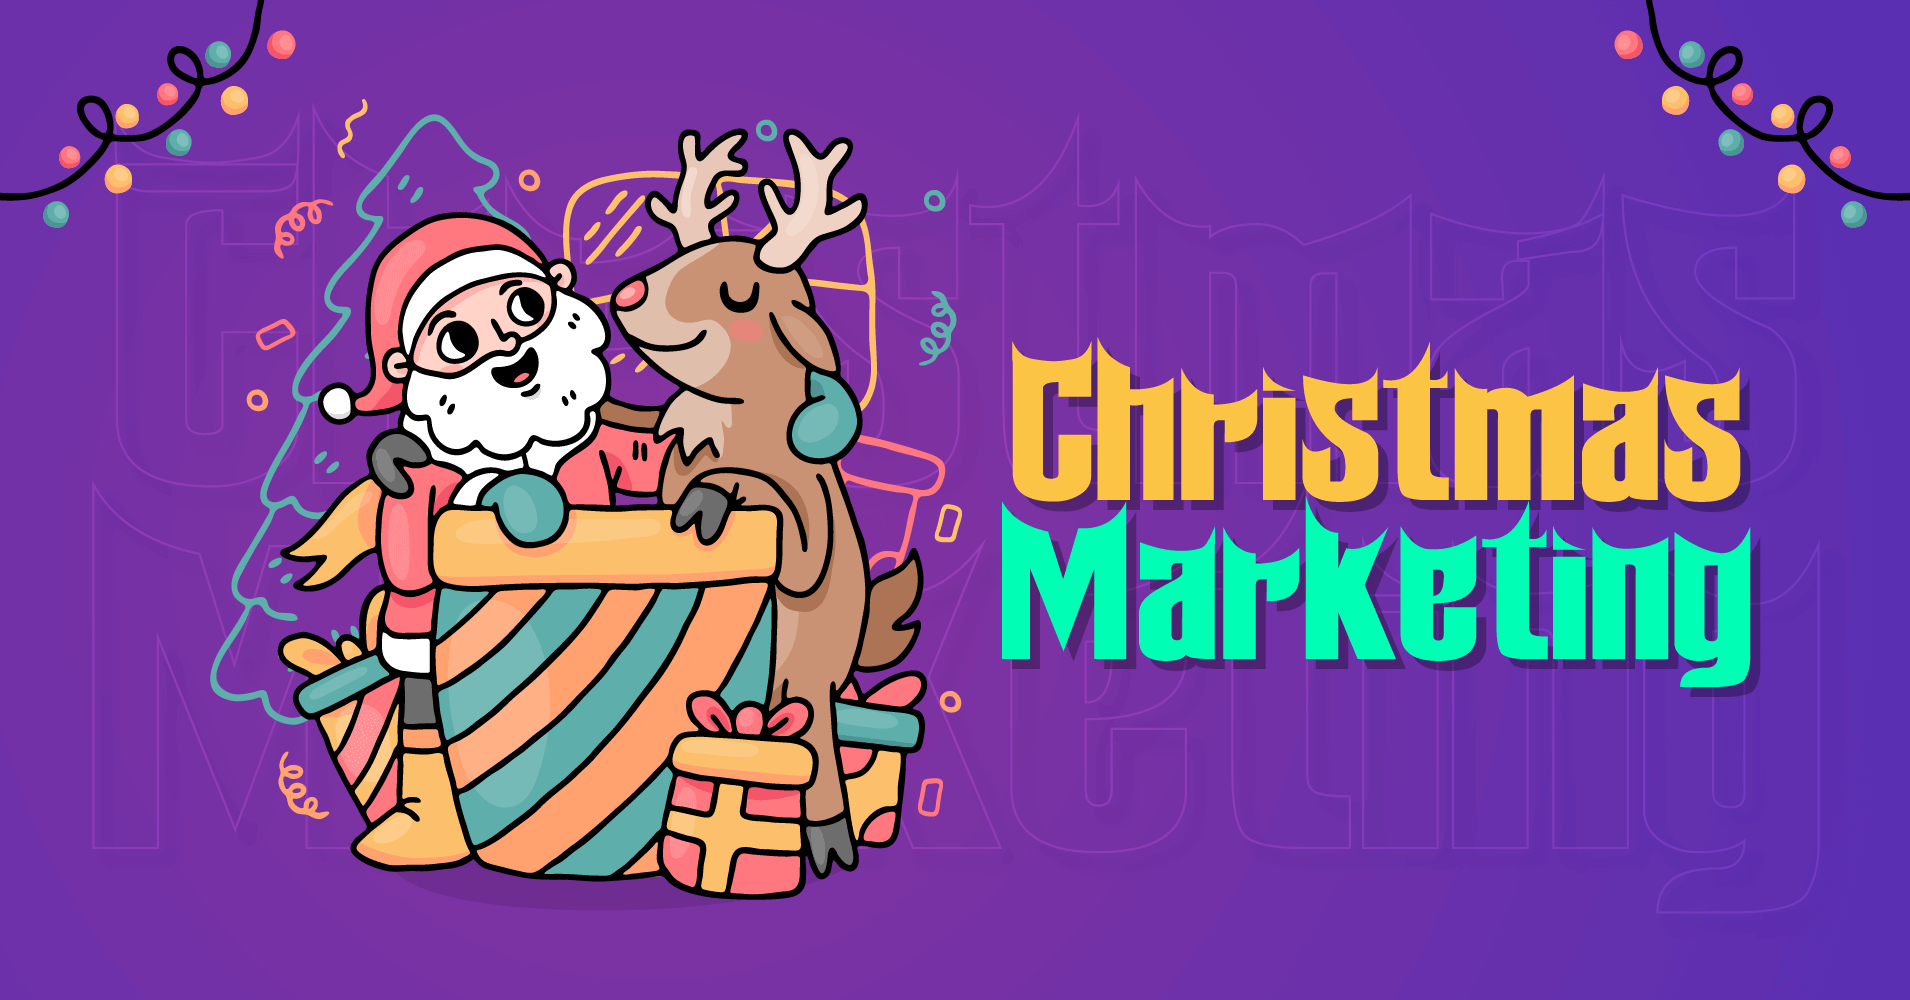 Christmas-marketing-ideas-to-double-your-sales